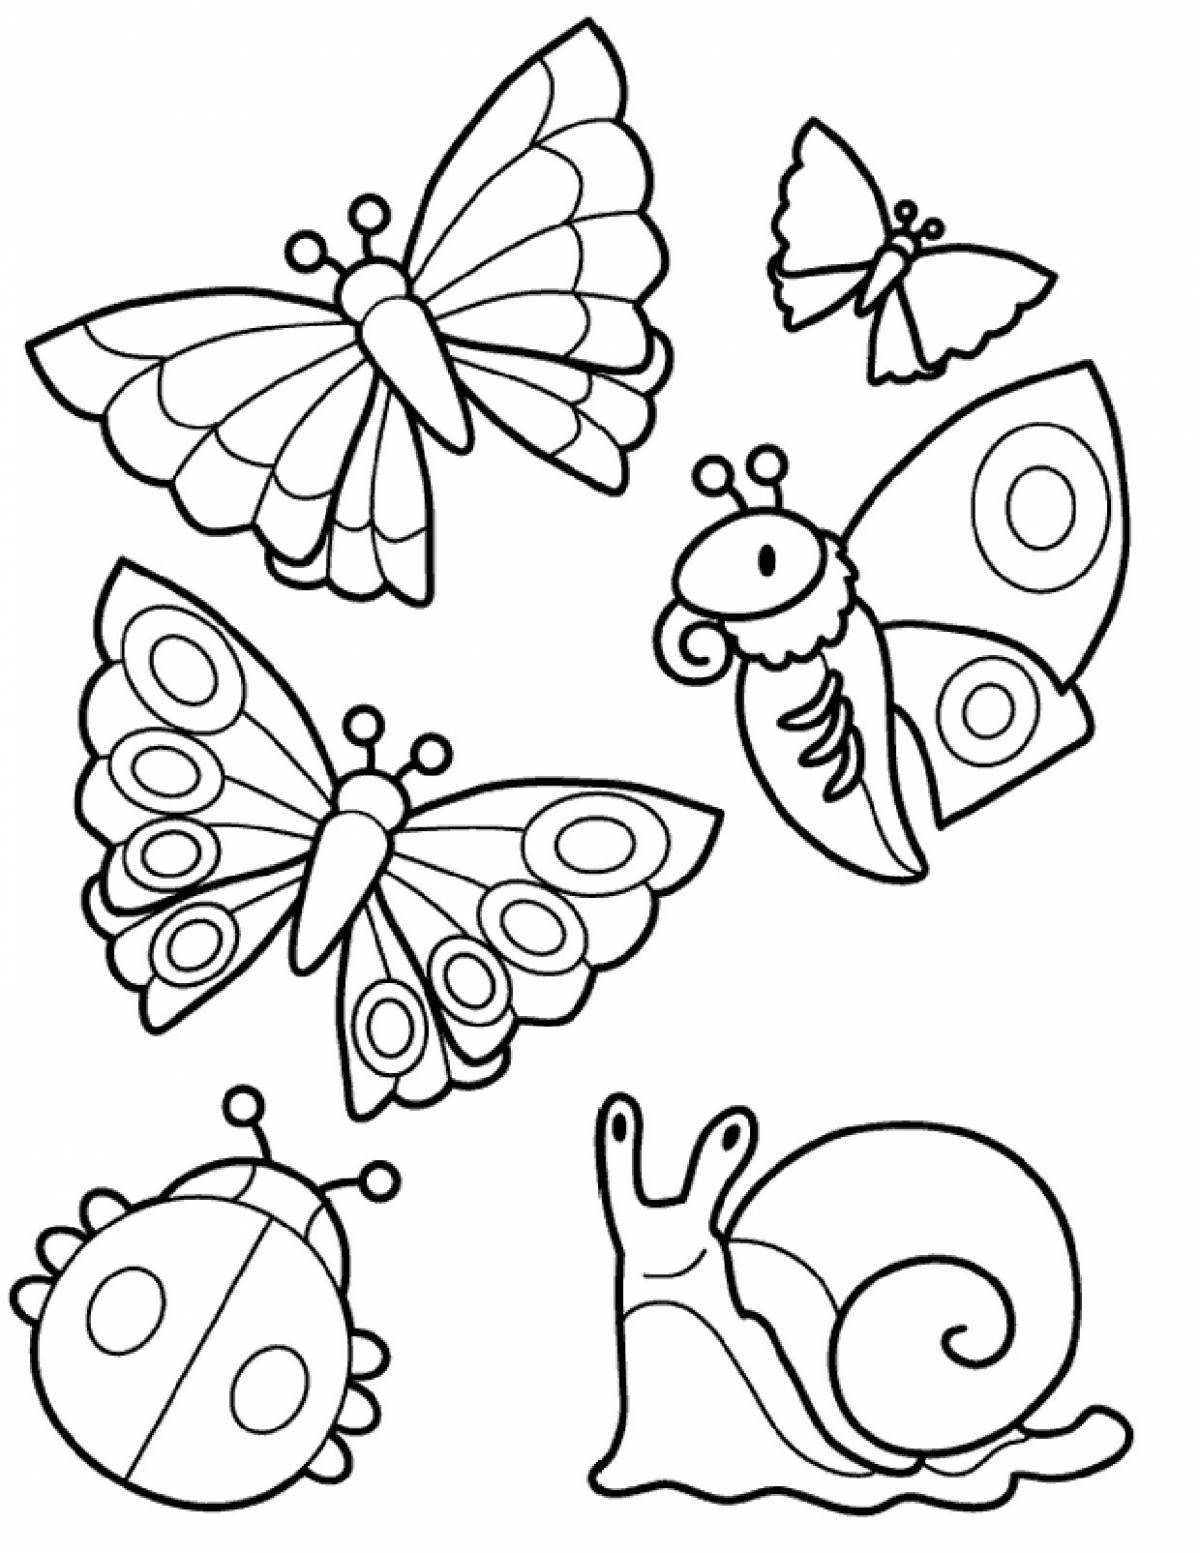 Playful insect coloring page for 5-6 year olds